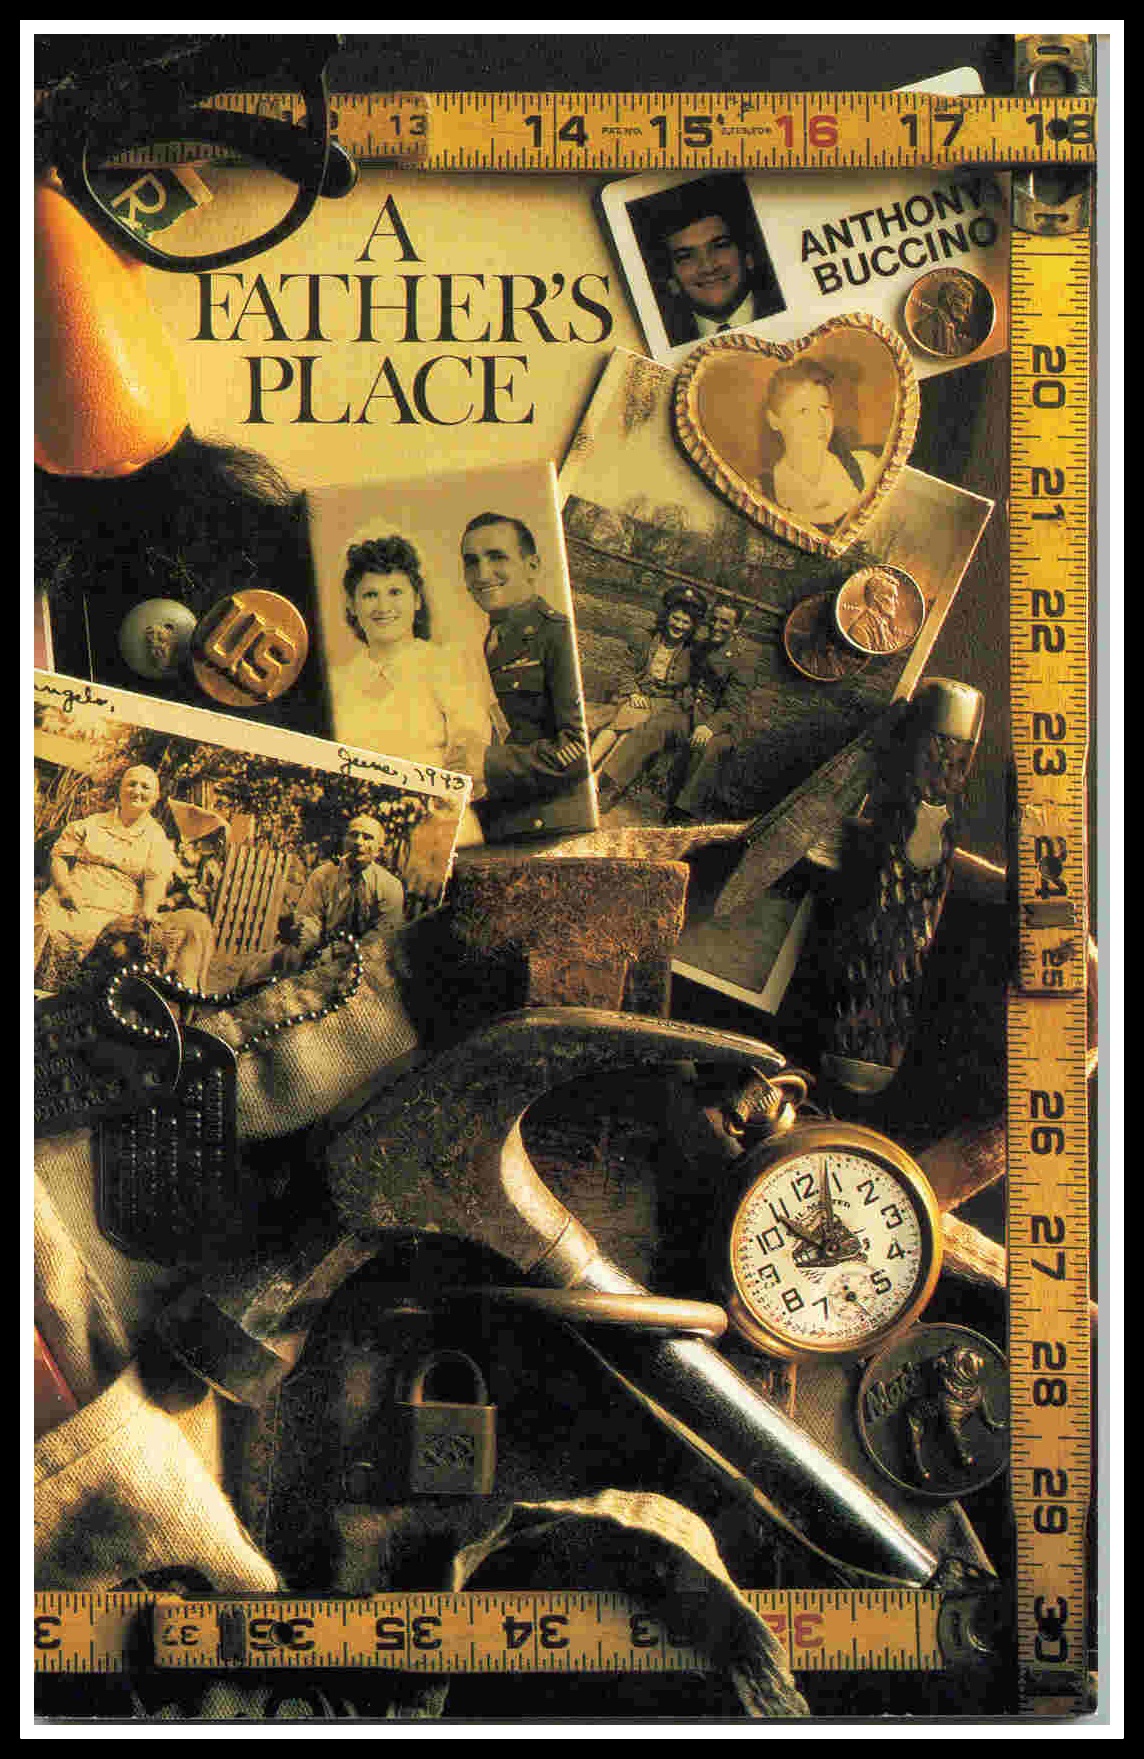 A Father's Place - An Eclectic Collection by Anthony Buccino